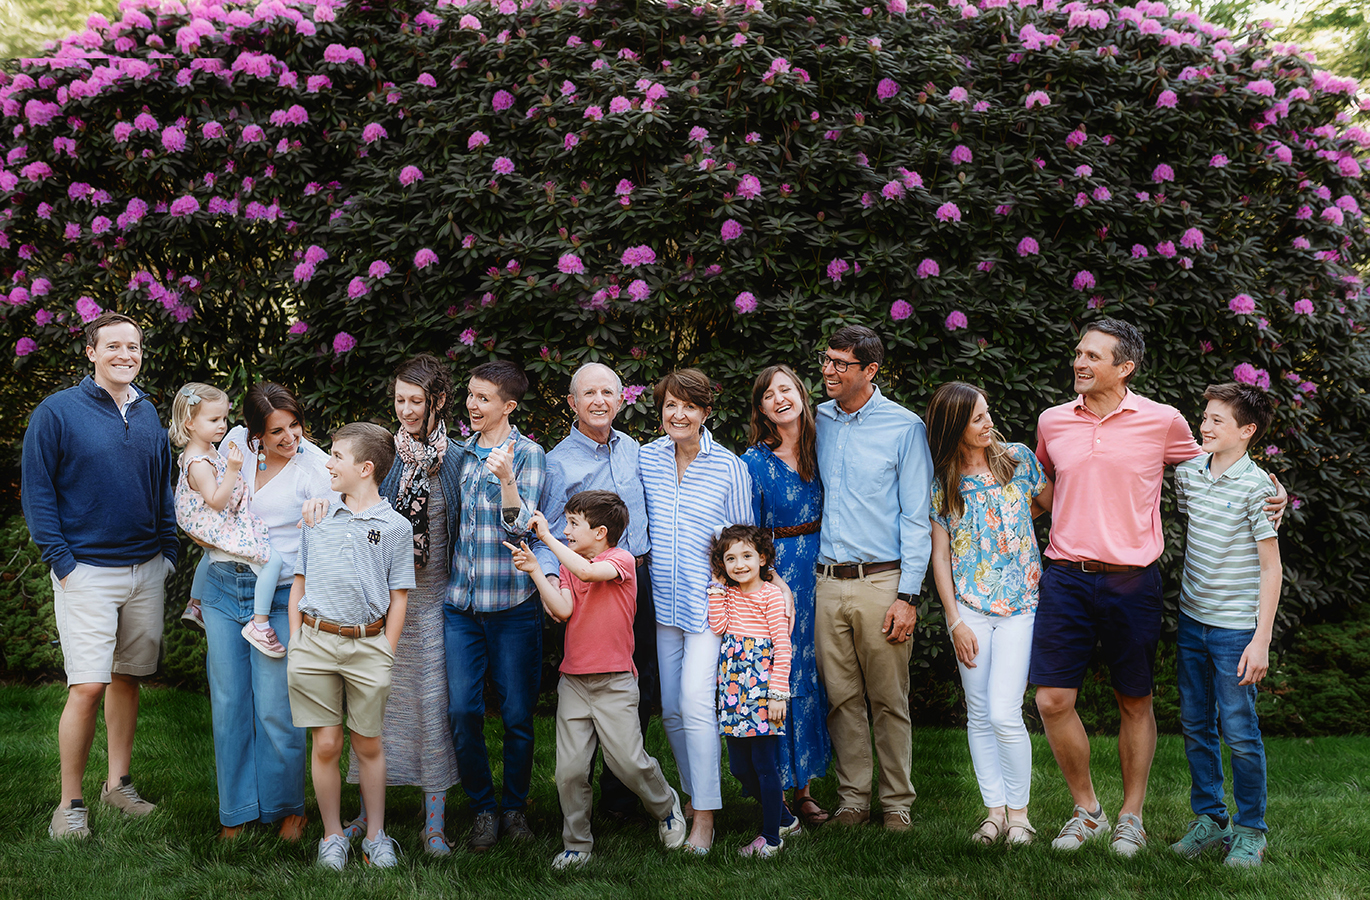 Extended Family poses for Family Photos during their Family Reunion Photography Session in Asheville, NC.